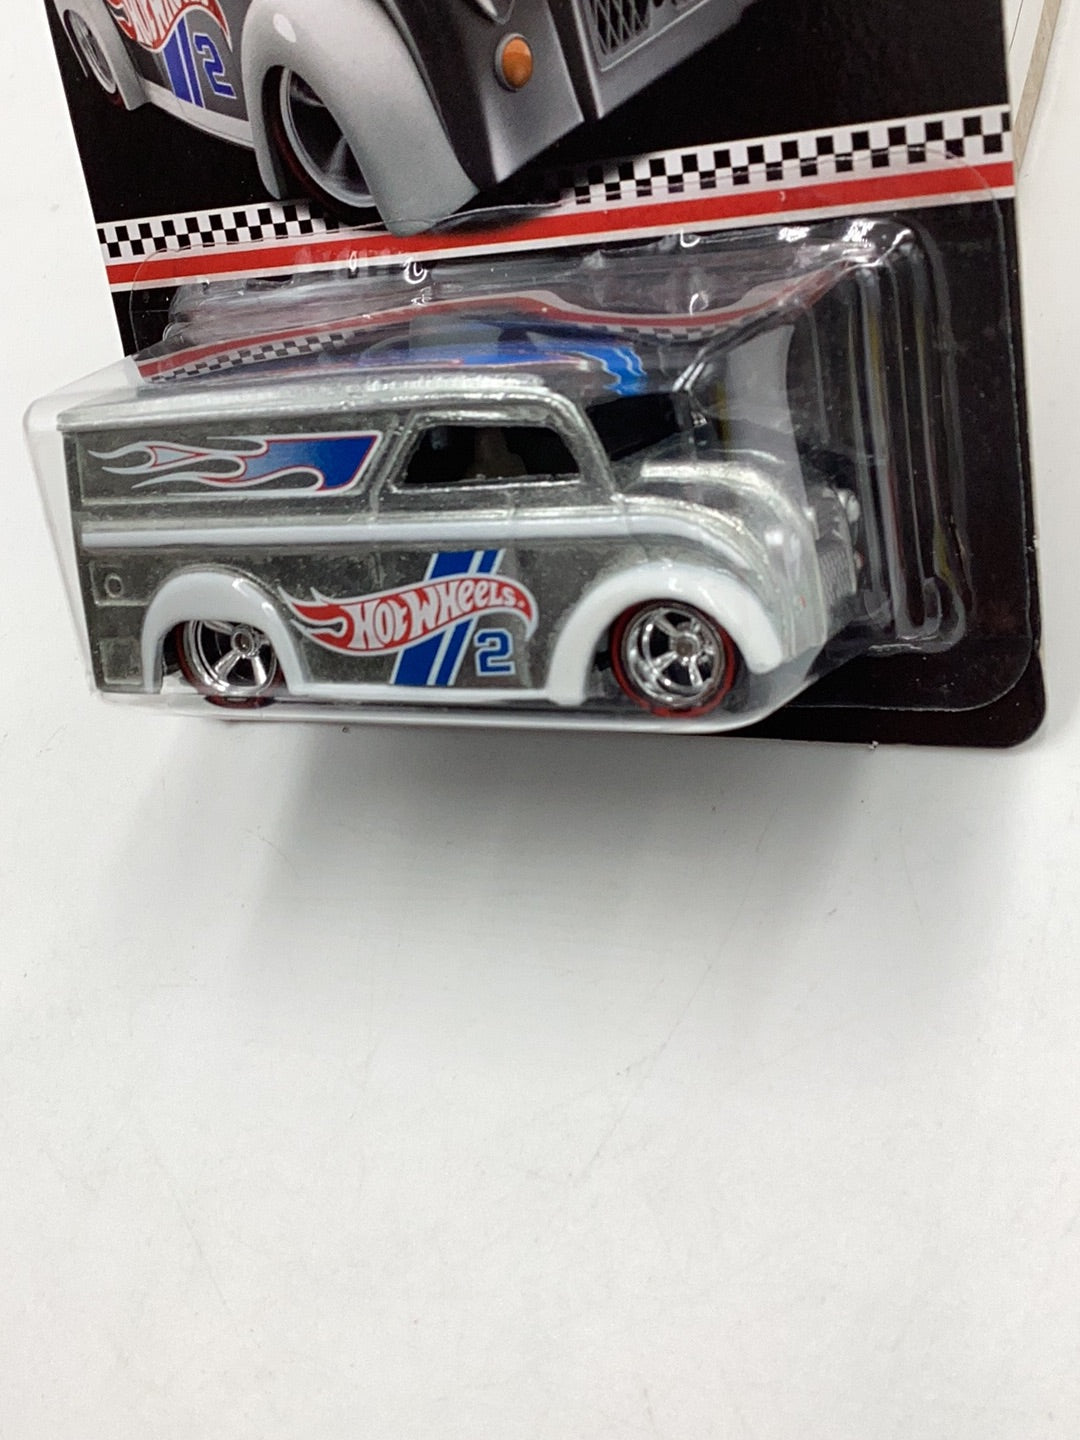 2019 Hot wheels  collectors edition Dairy Delivery mail in Zamac edition Real Riders